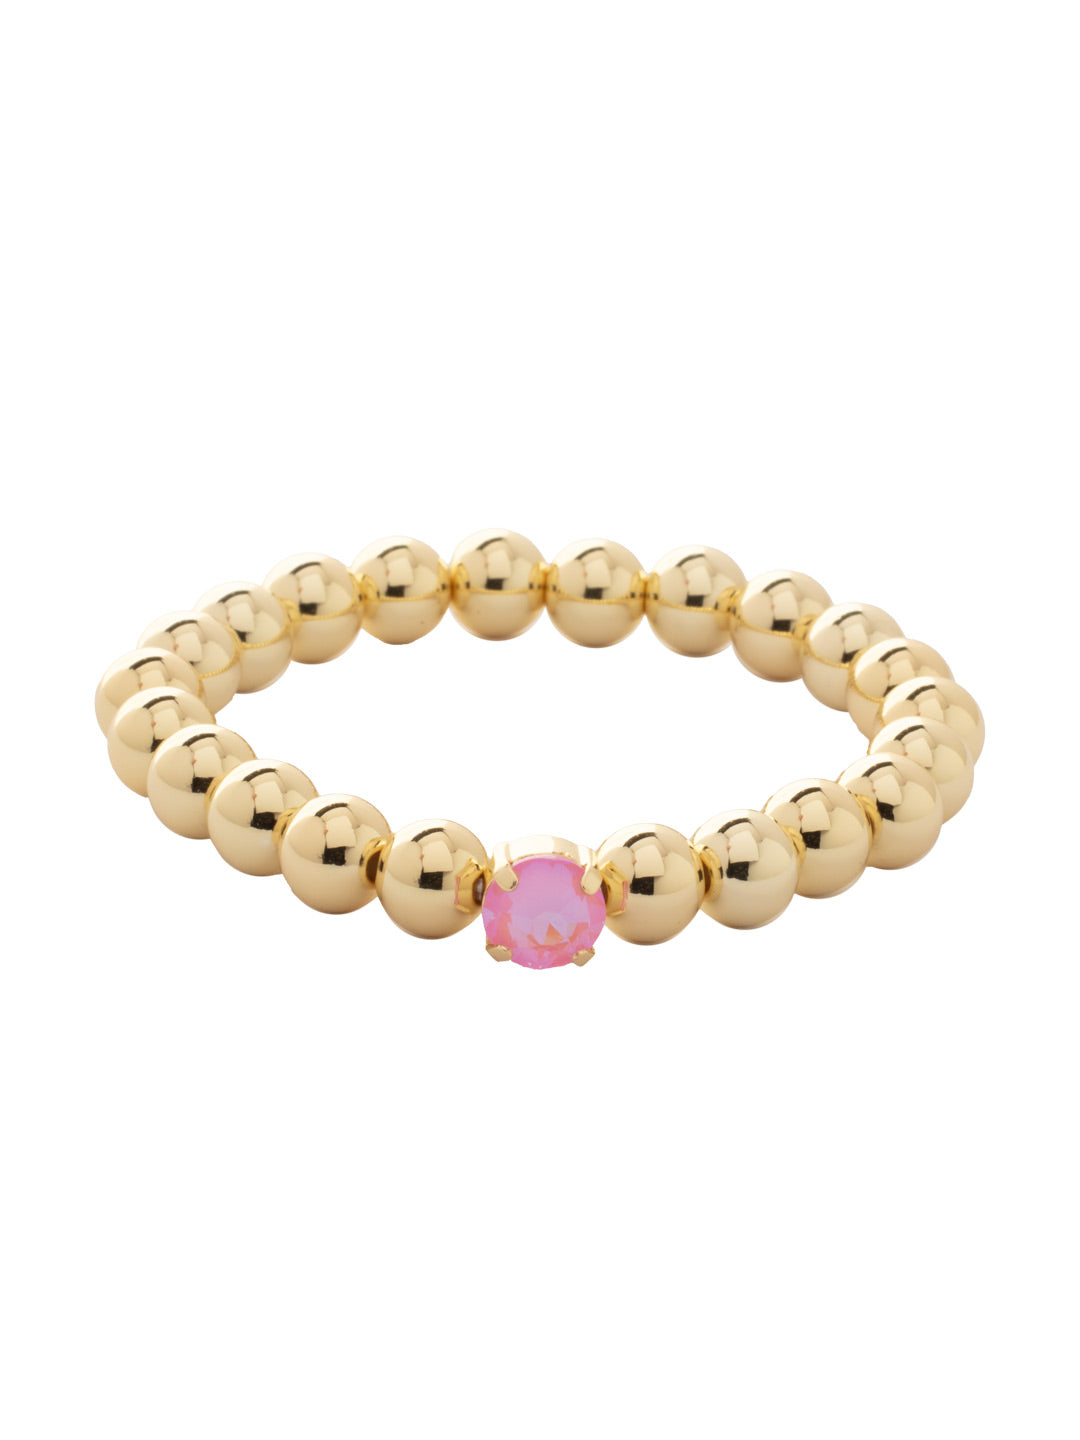 Single Crystal Stretch Bracelet - 4BFJ21BGLRD - <p>Single Crystal Stretch Bracelet features repeating metal beads and a single round cut crystal on a multi-layered stretchy jewelry filament, creating a durable and trendy piece. From Sorrelli's Light Rose Delite collection in our Bright Gold-tone finish.</p>